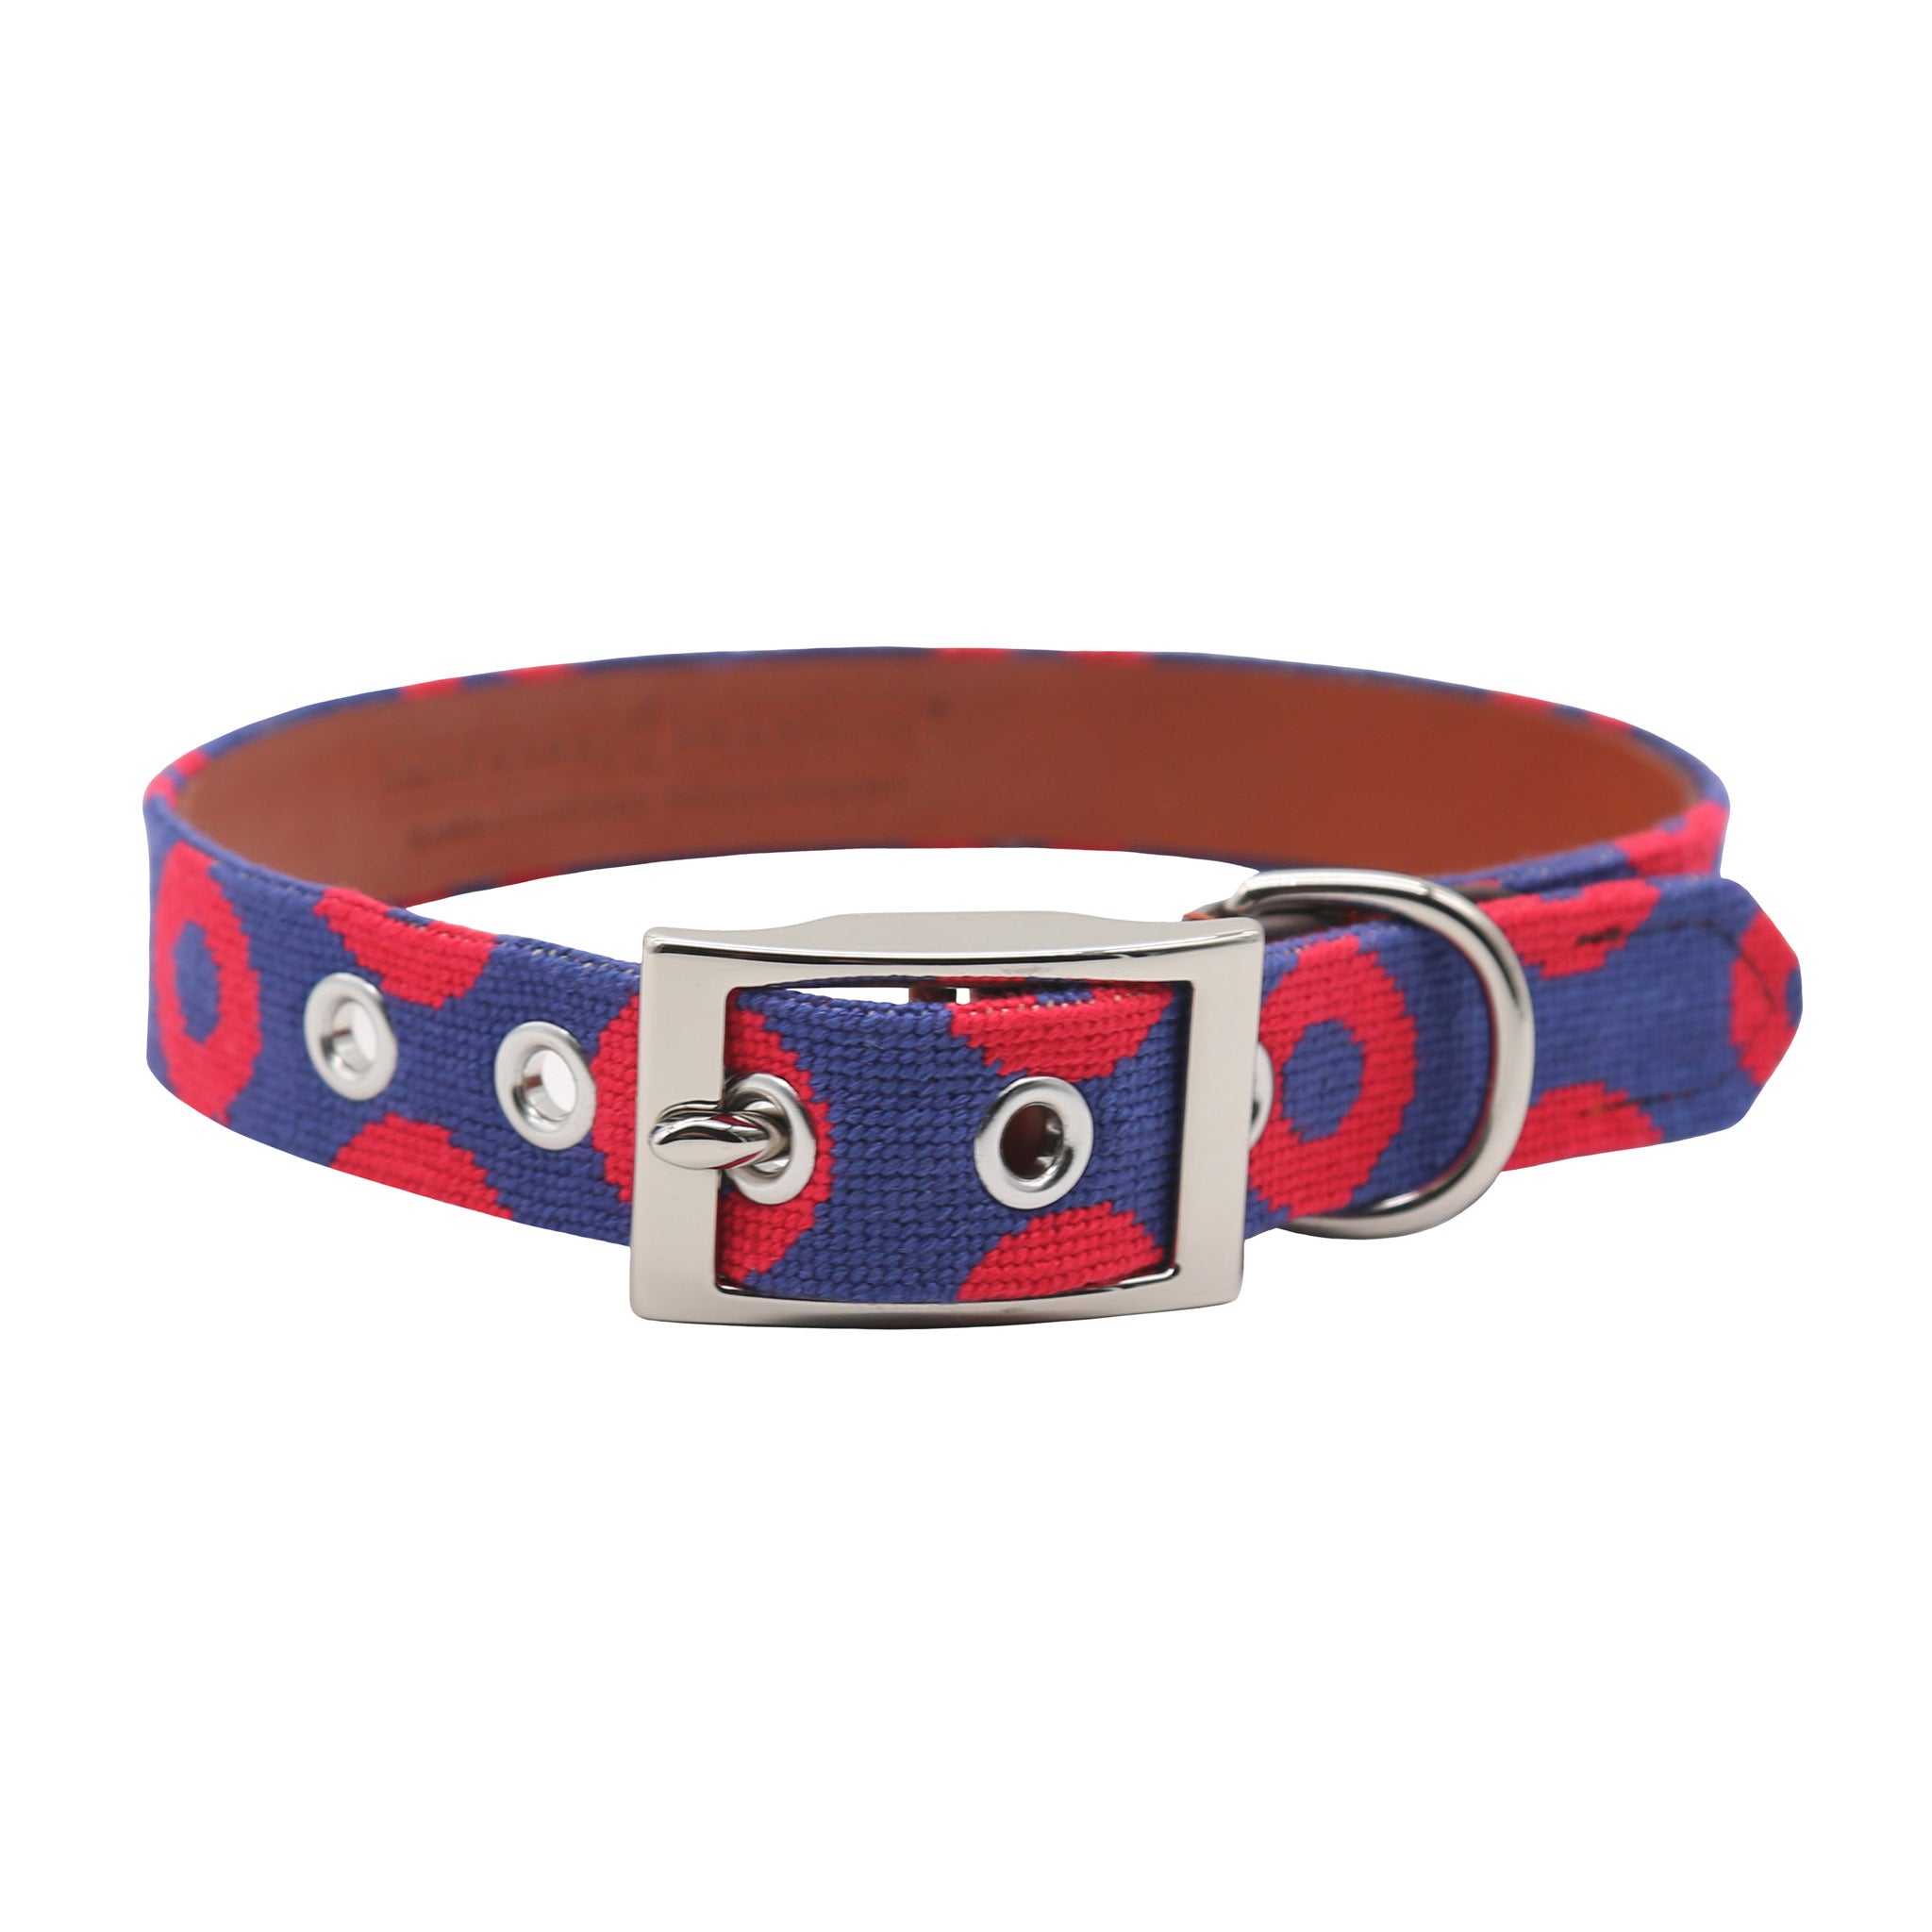 Smathers and Branson The Donut Pattern Needlepoint Dog Collar Looped 